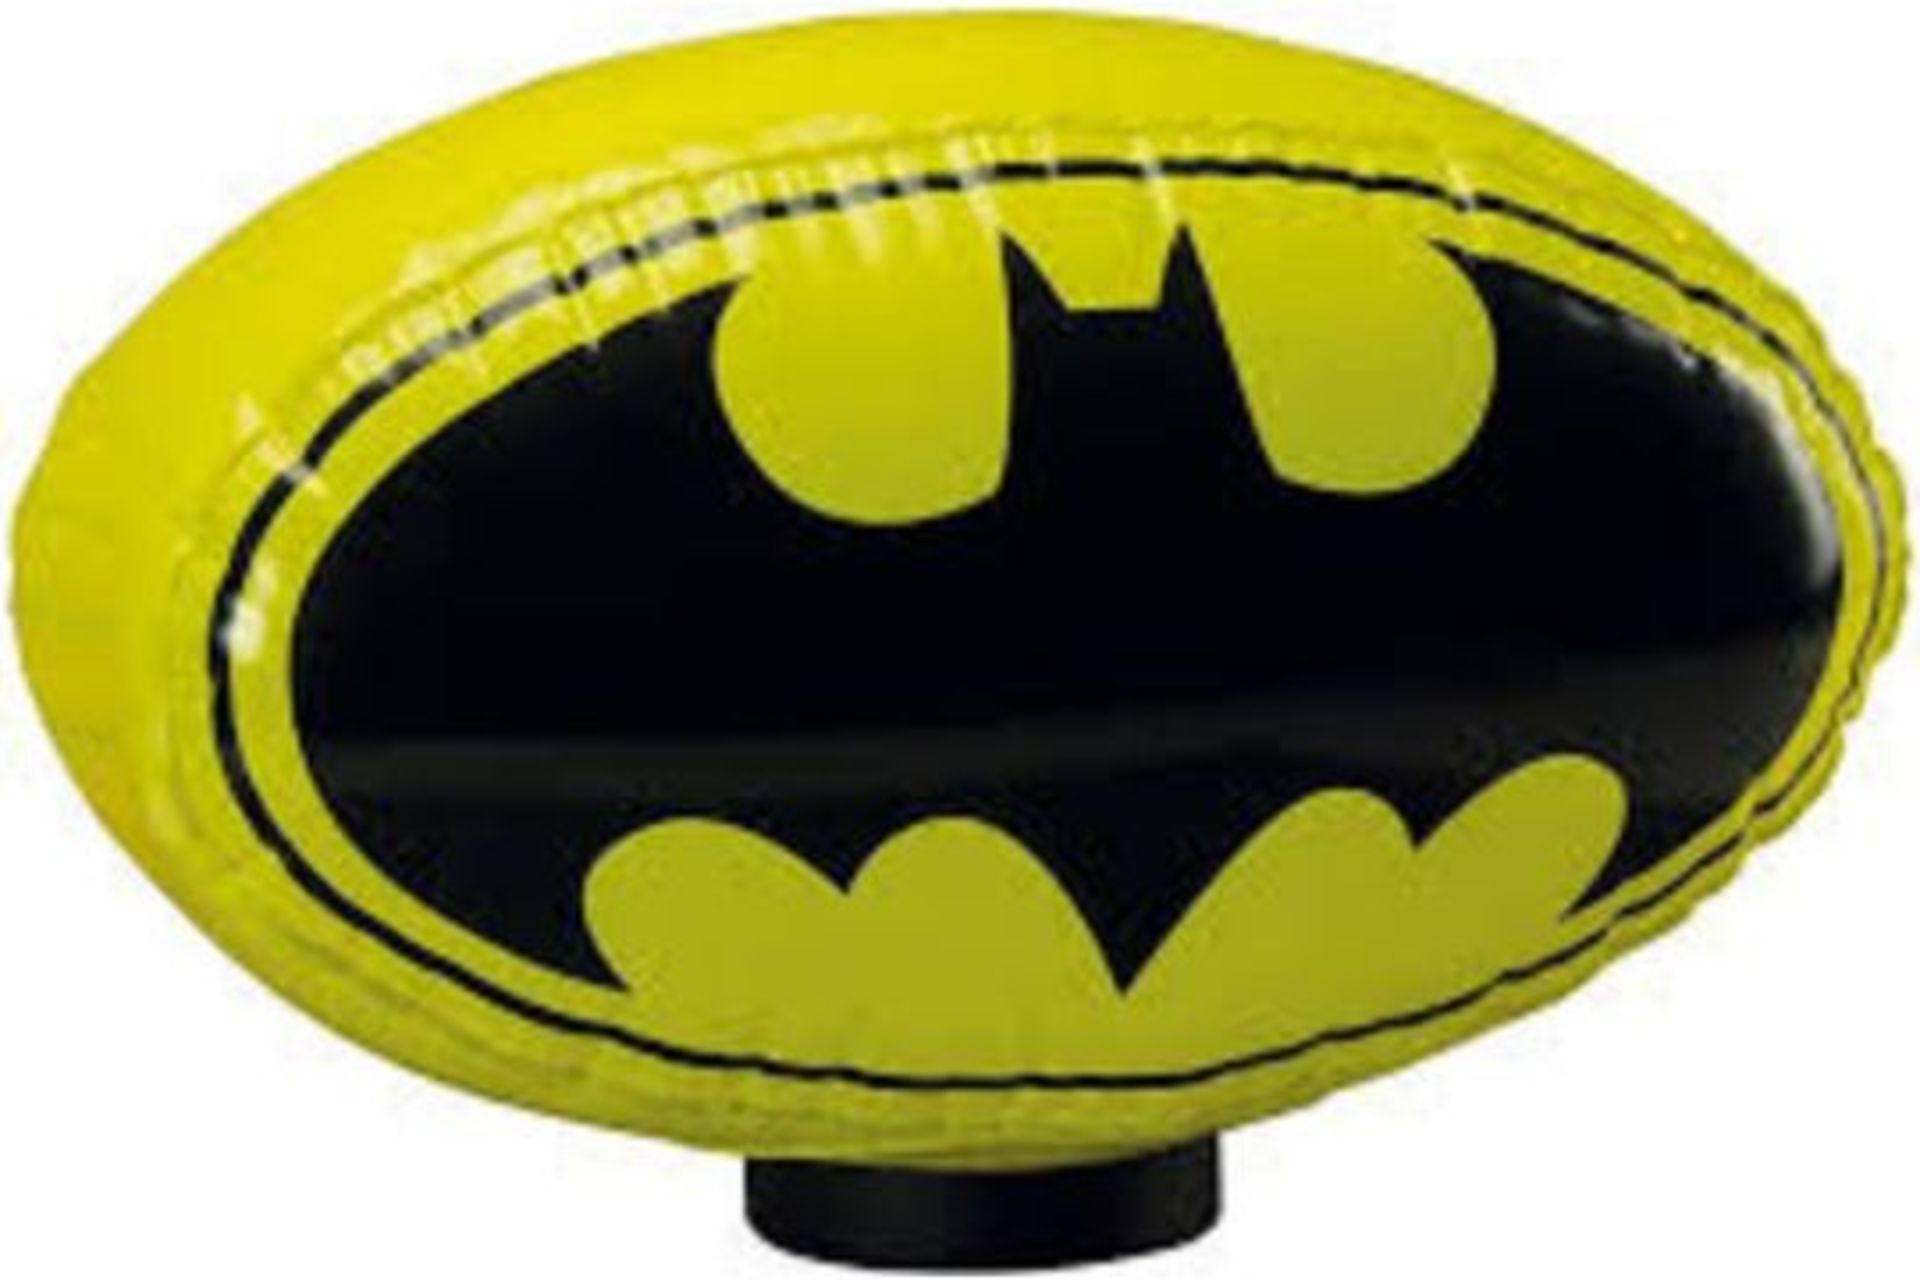 BRAND NEW XL BATMAN LOGO INFLATABLE LIGHT LAMP TOUCH ACTIVATED ON/OFF - Image 2 of 2